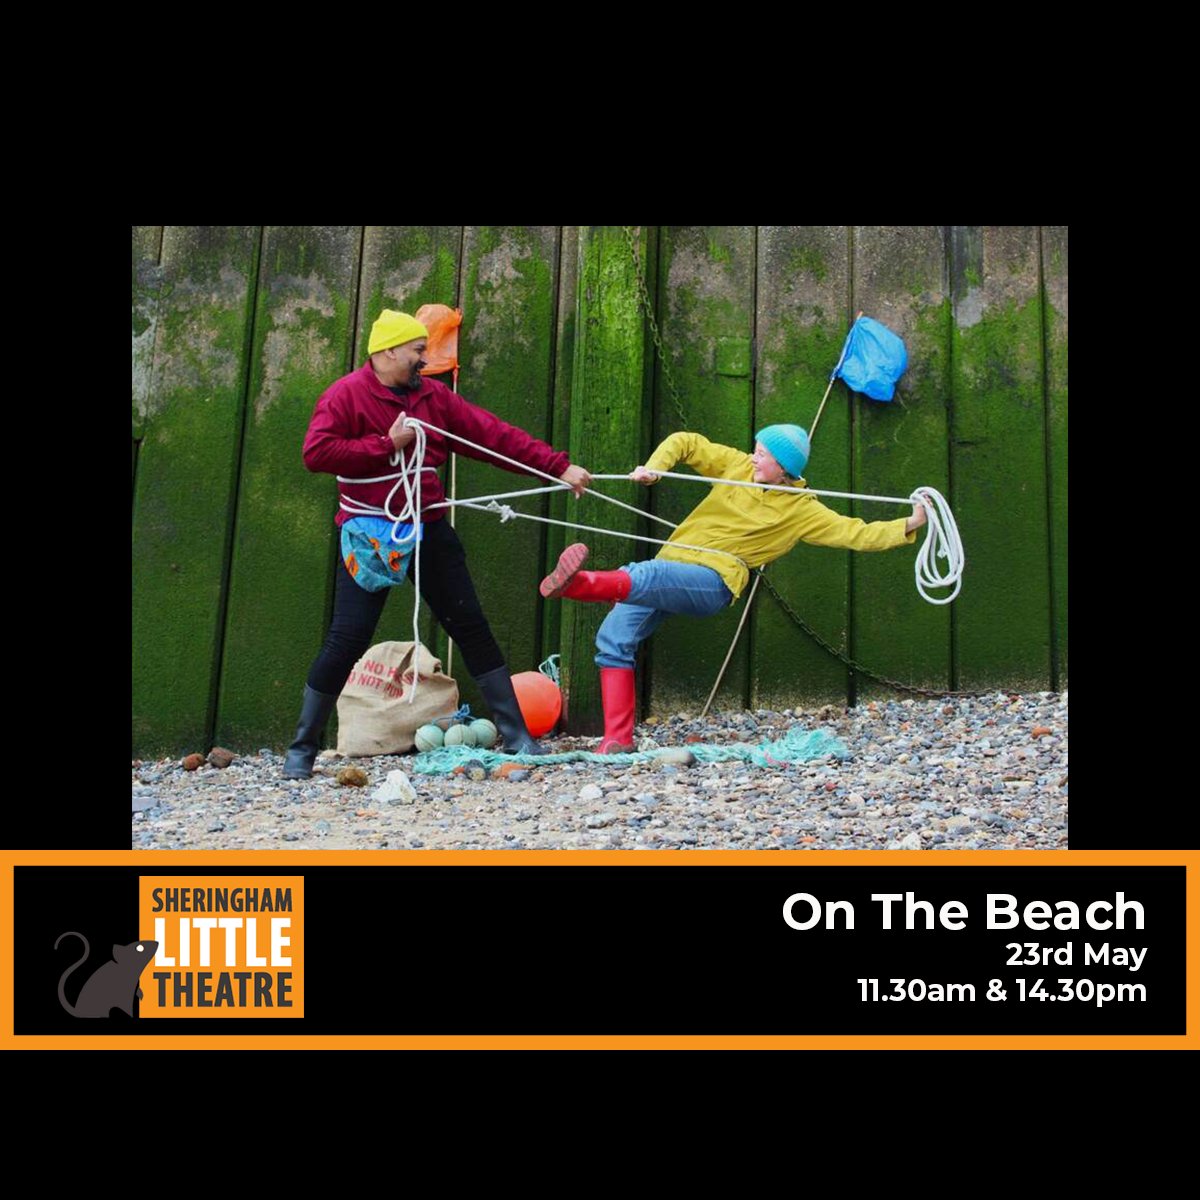 Join us for a day in the life of a working beach, as we explore its myths, magic, perils and ever-changing beauty through dance, music and visual storytelling. 🗓 23rd May 🕰 11.30am & 14.30pm 📍Sheringham Little Theatre 🎟 …eringhamlittletheatre.ticketsolve.com/ticketbooth/sh…